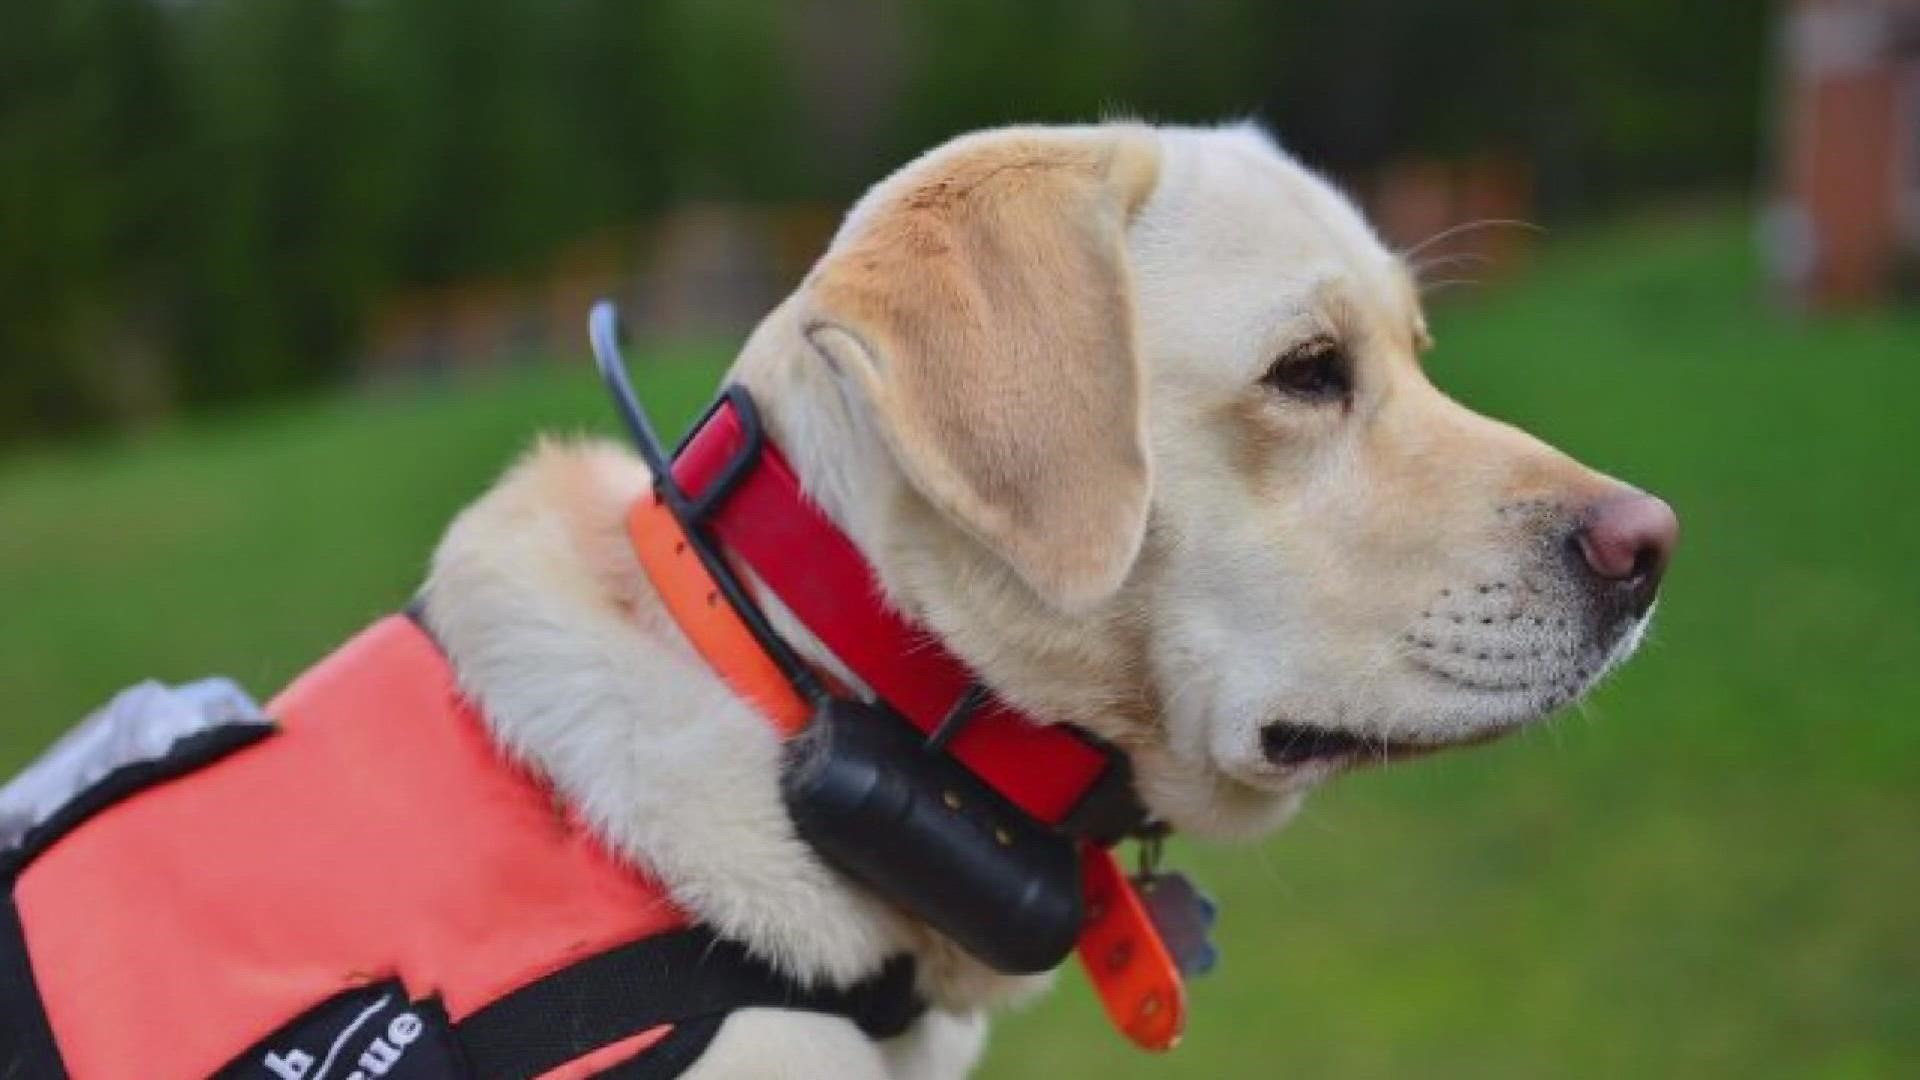 Twelve-year-old labrador Keb has been on 100 missions and made half a dozen finds as a search and rescue dog, specializing in finding human remains.